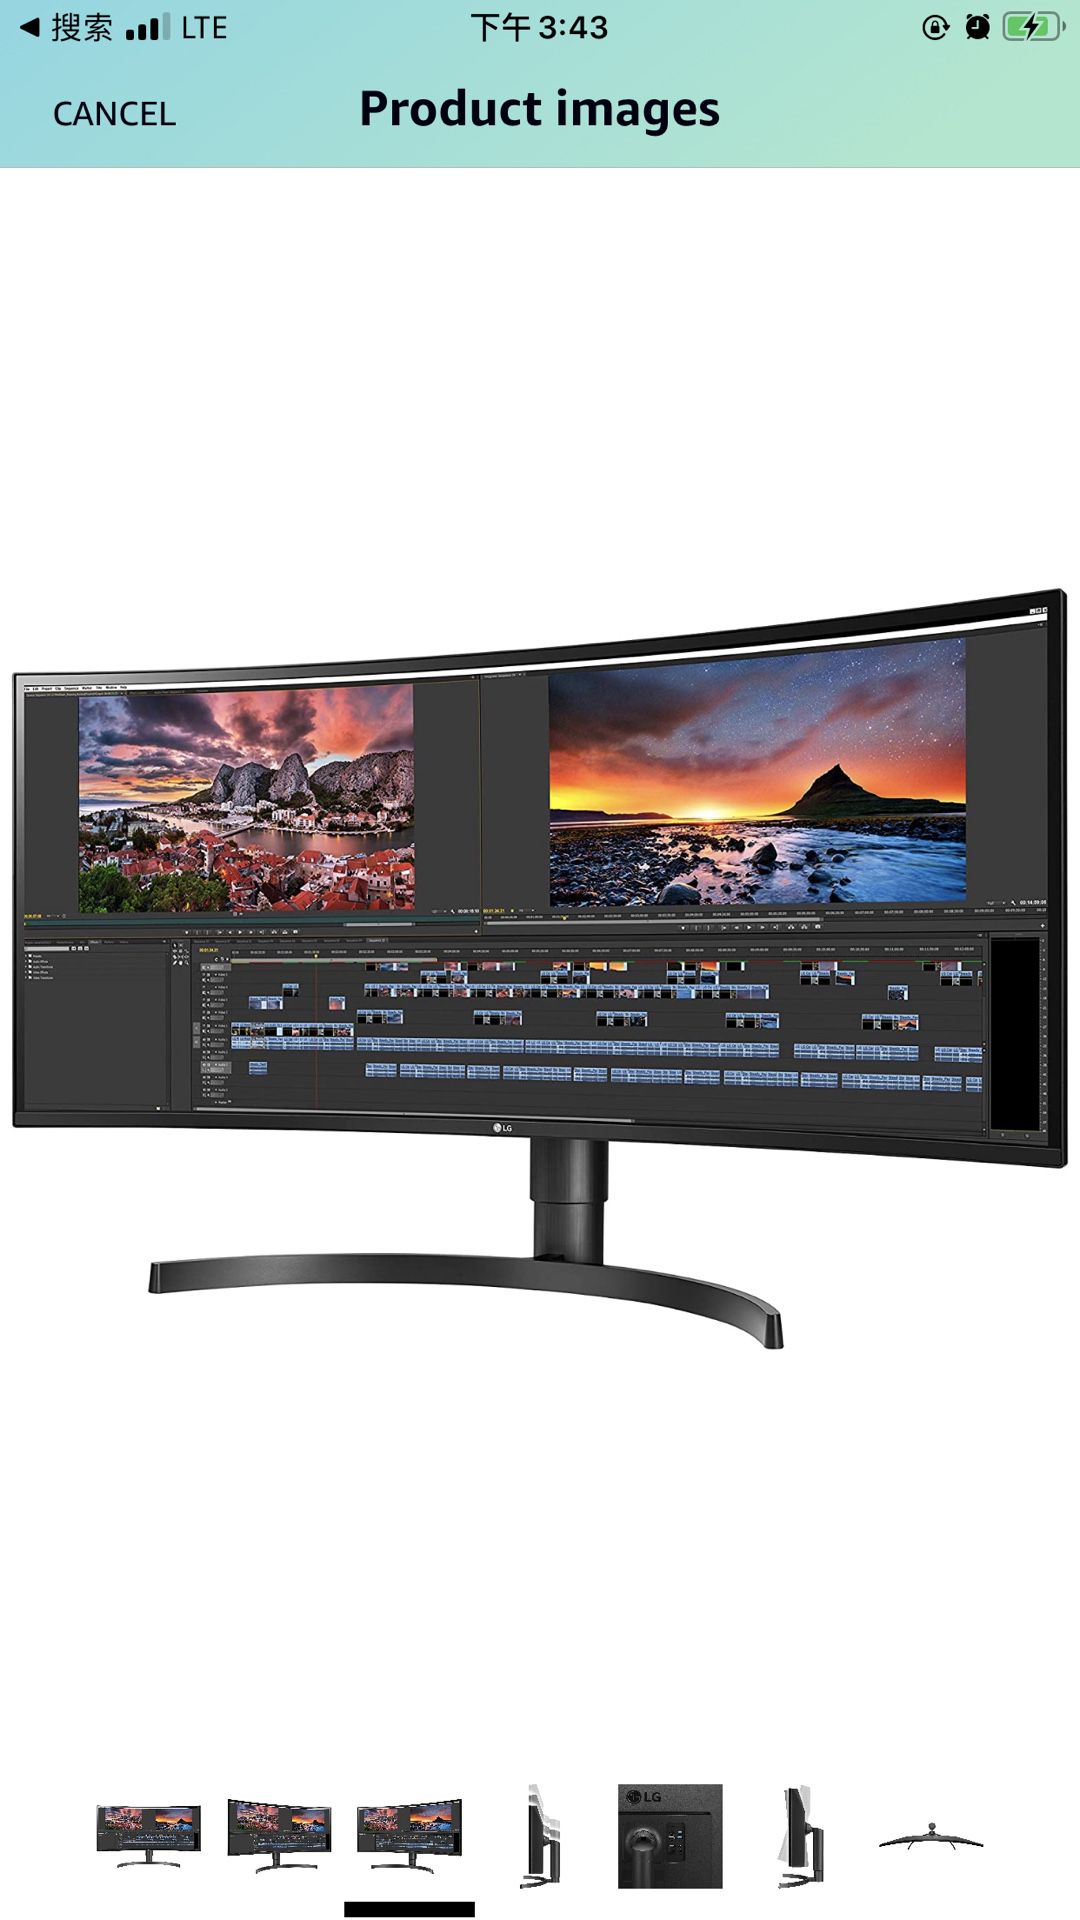 LG 34WN80C-B 34 inch 21:9 Curved UltraWide WQHD IPS Monitor with USB Type-C Connectivity sRGB 99% Color Gamut and HDR10 Compatibility, Black